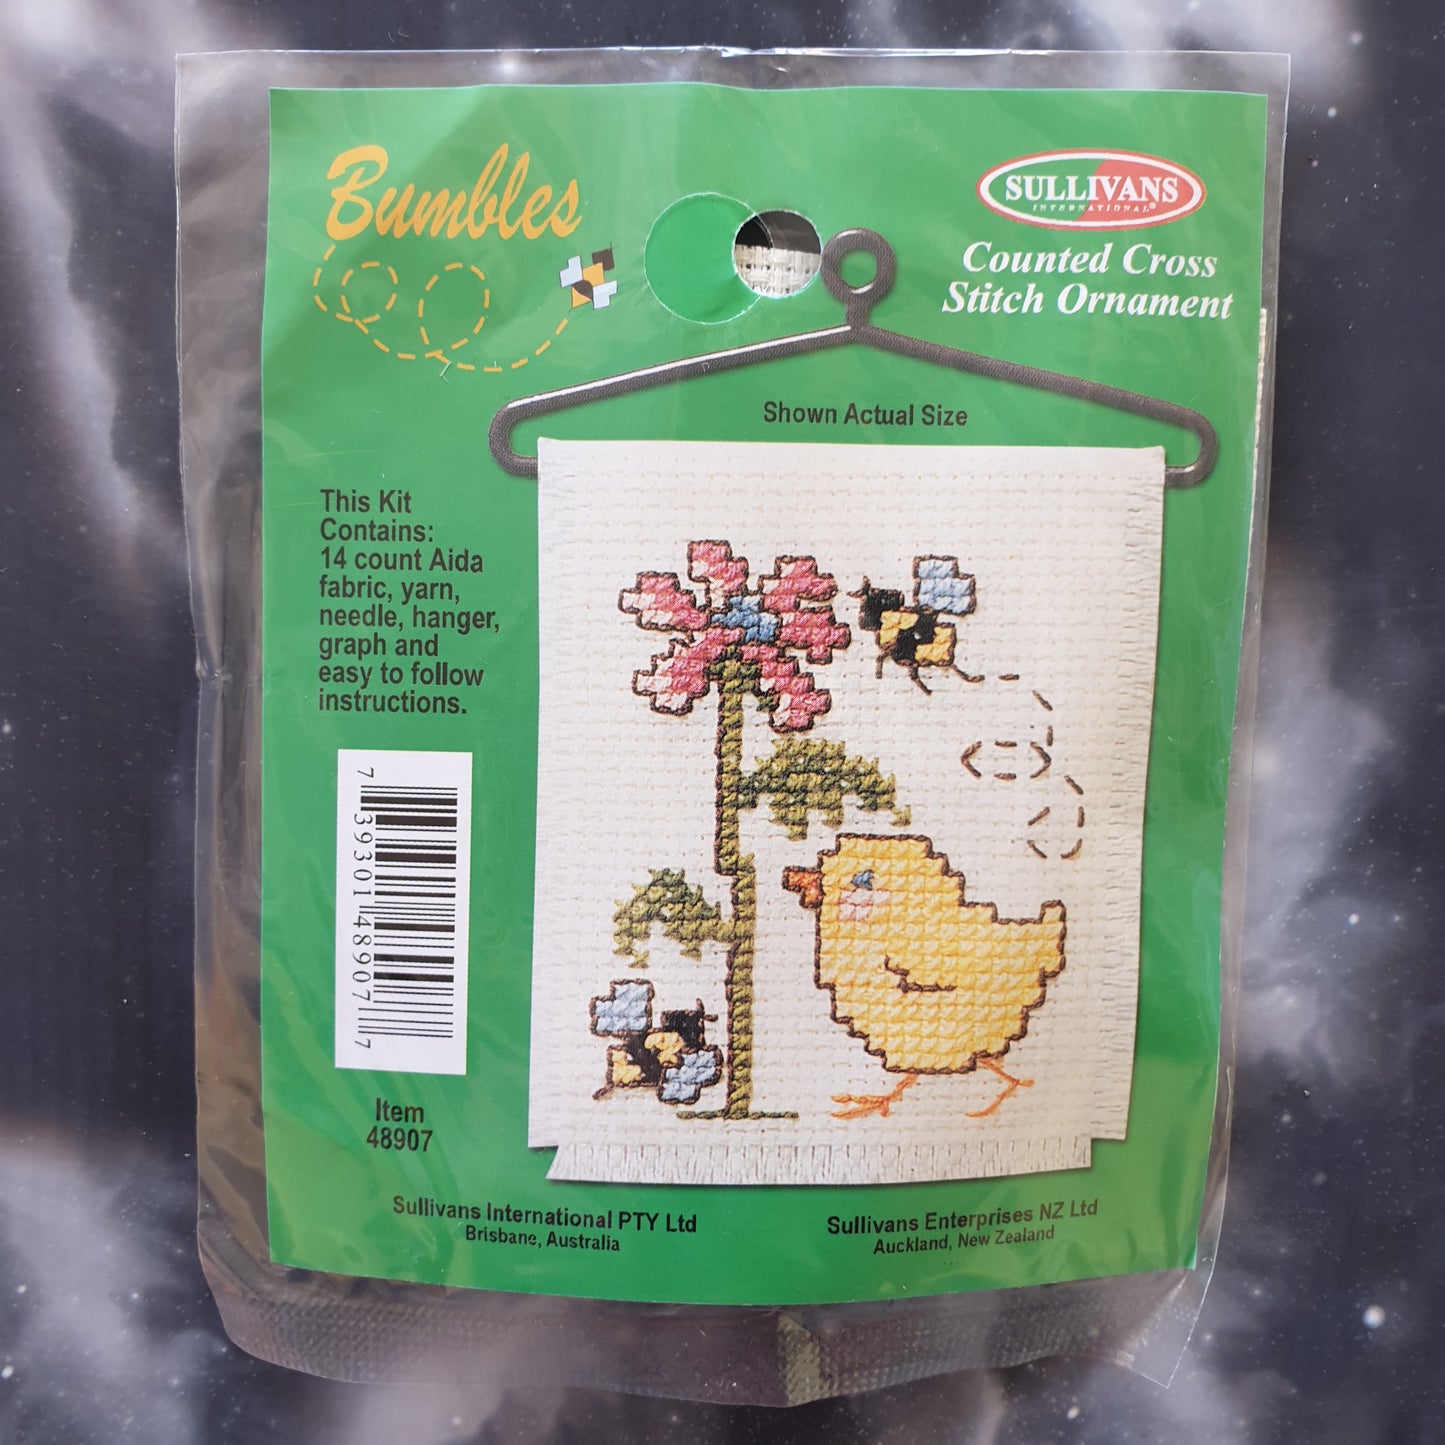 Chick with Flowers & Bees Counted Cross Stitch Ornament Kit